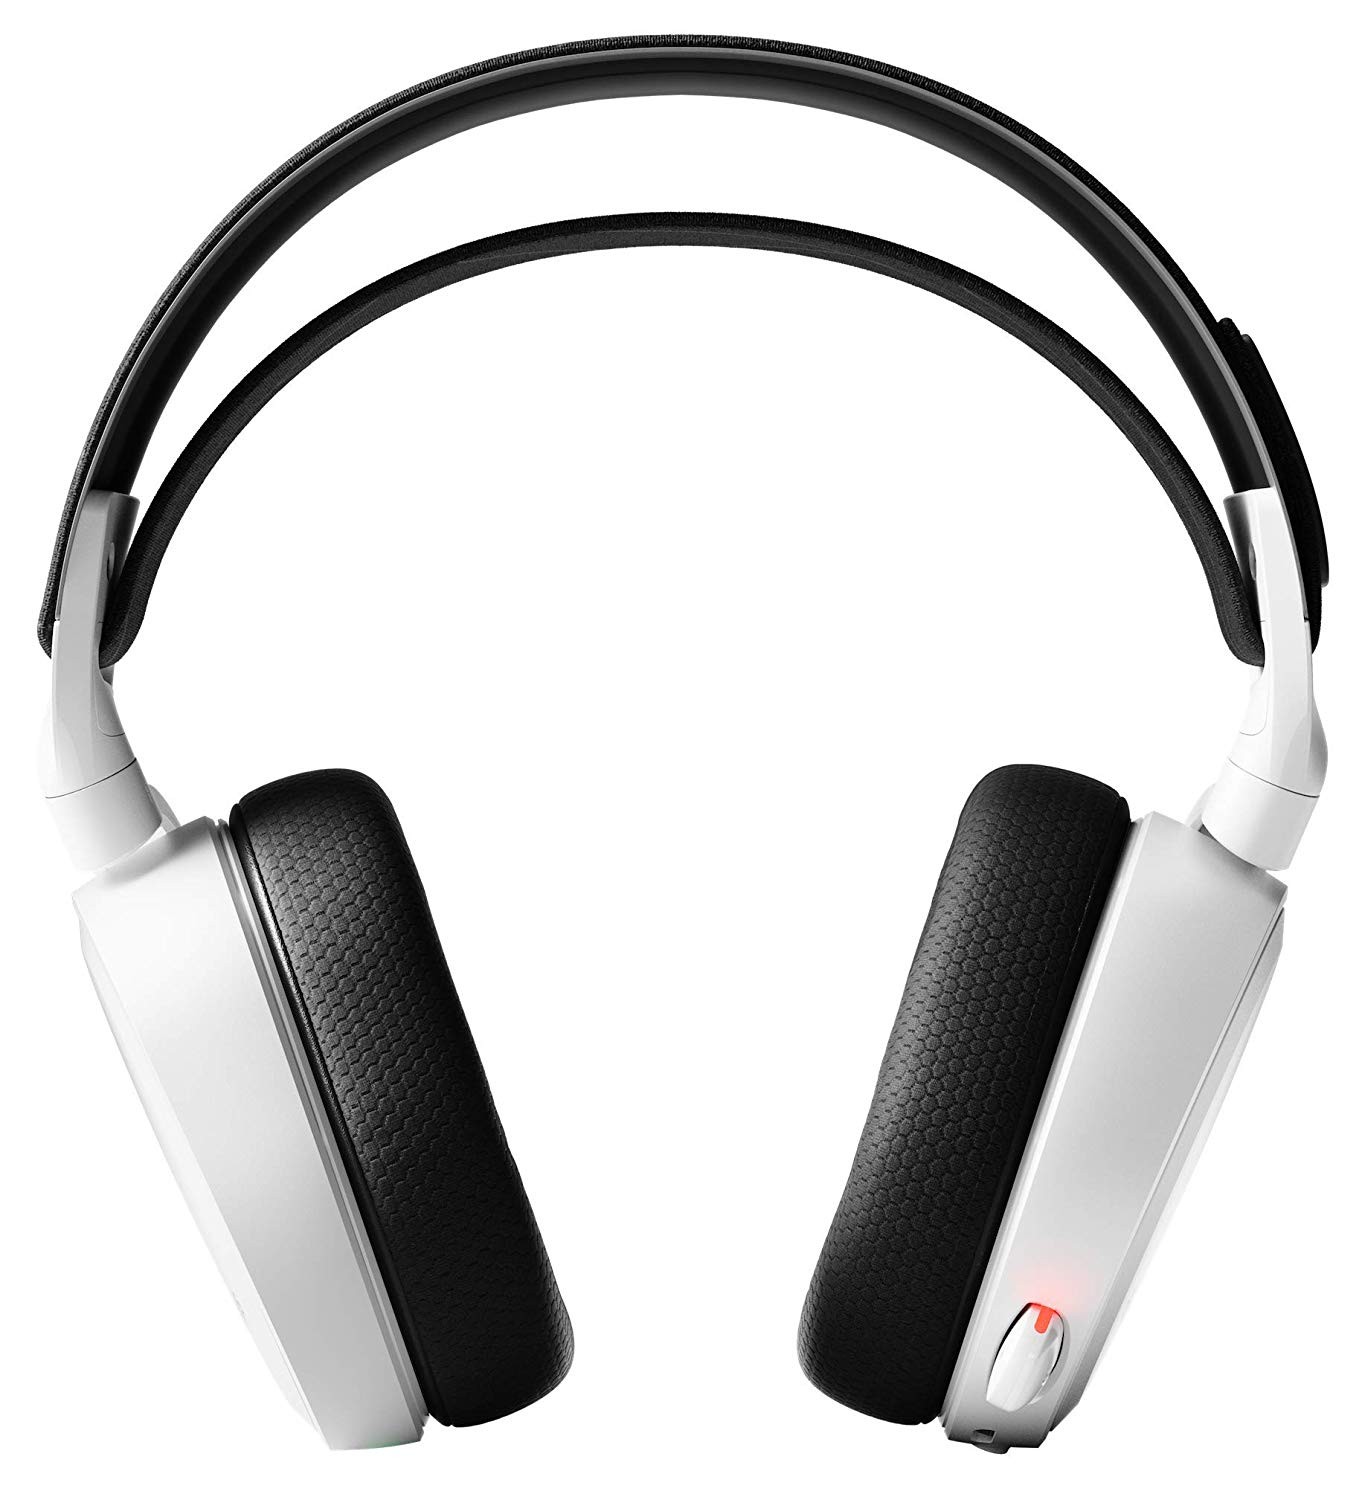 Steelseries Arctis 7 White (2019 Edition) gaming headset